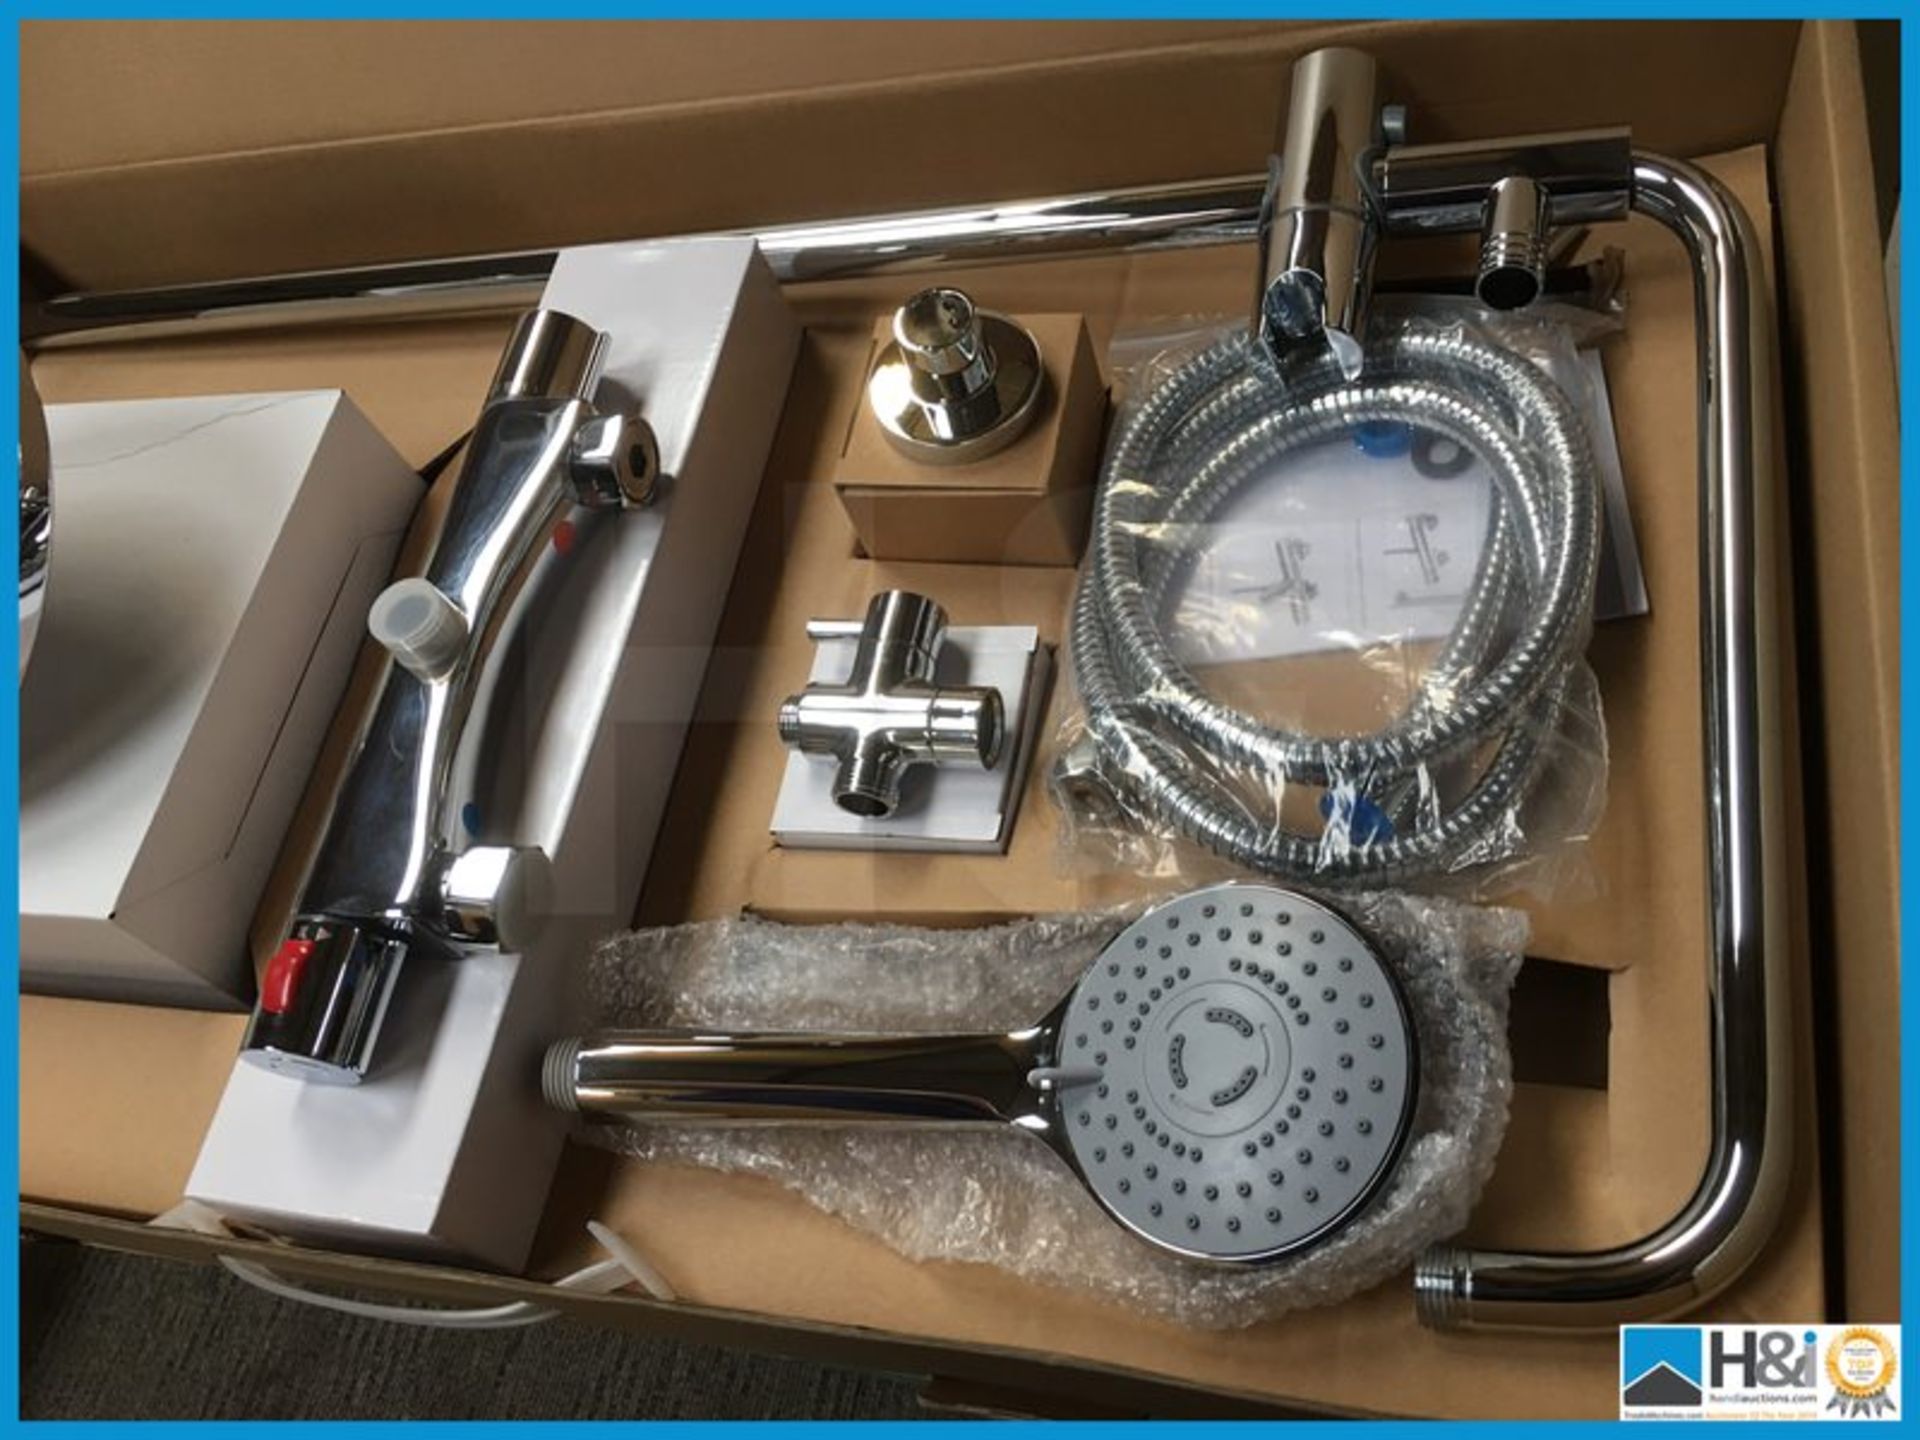 Designer KI001A thermostatic shower kit with riser rail, handset and round overhead shower head .New - Image 2 of 5